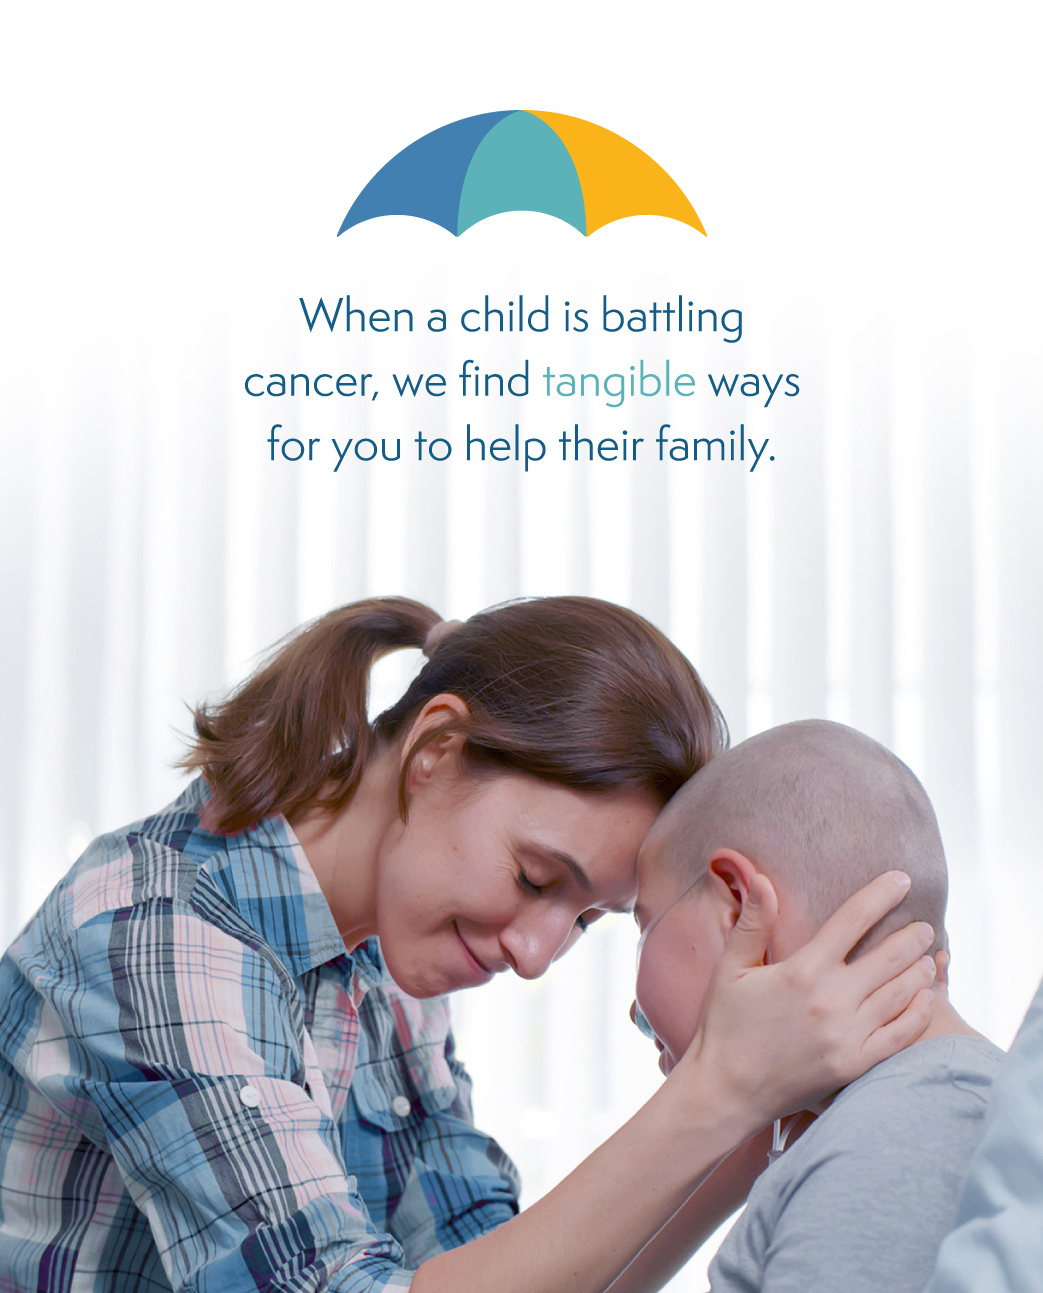 Helping Families Handle Cancer